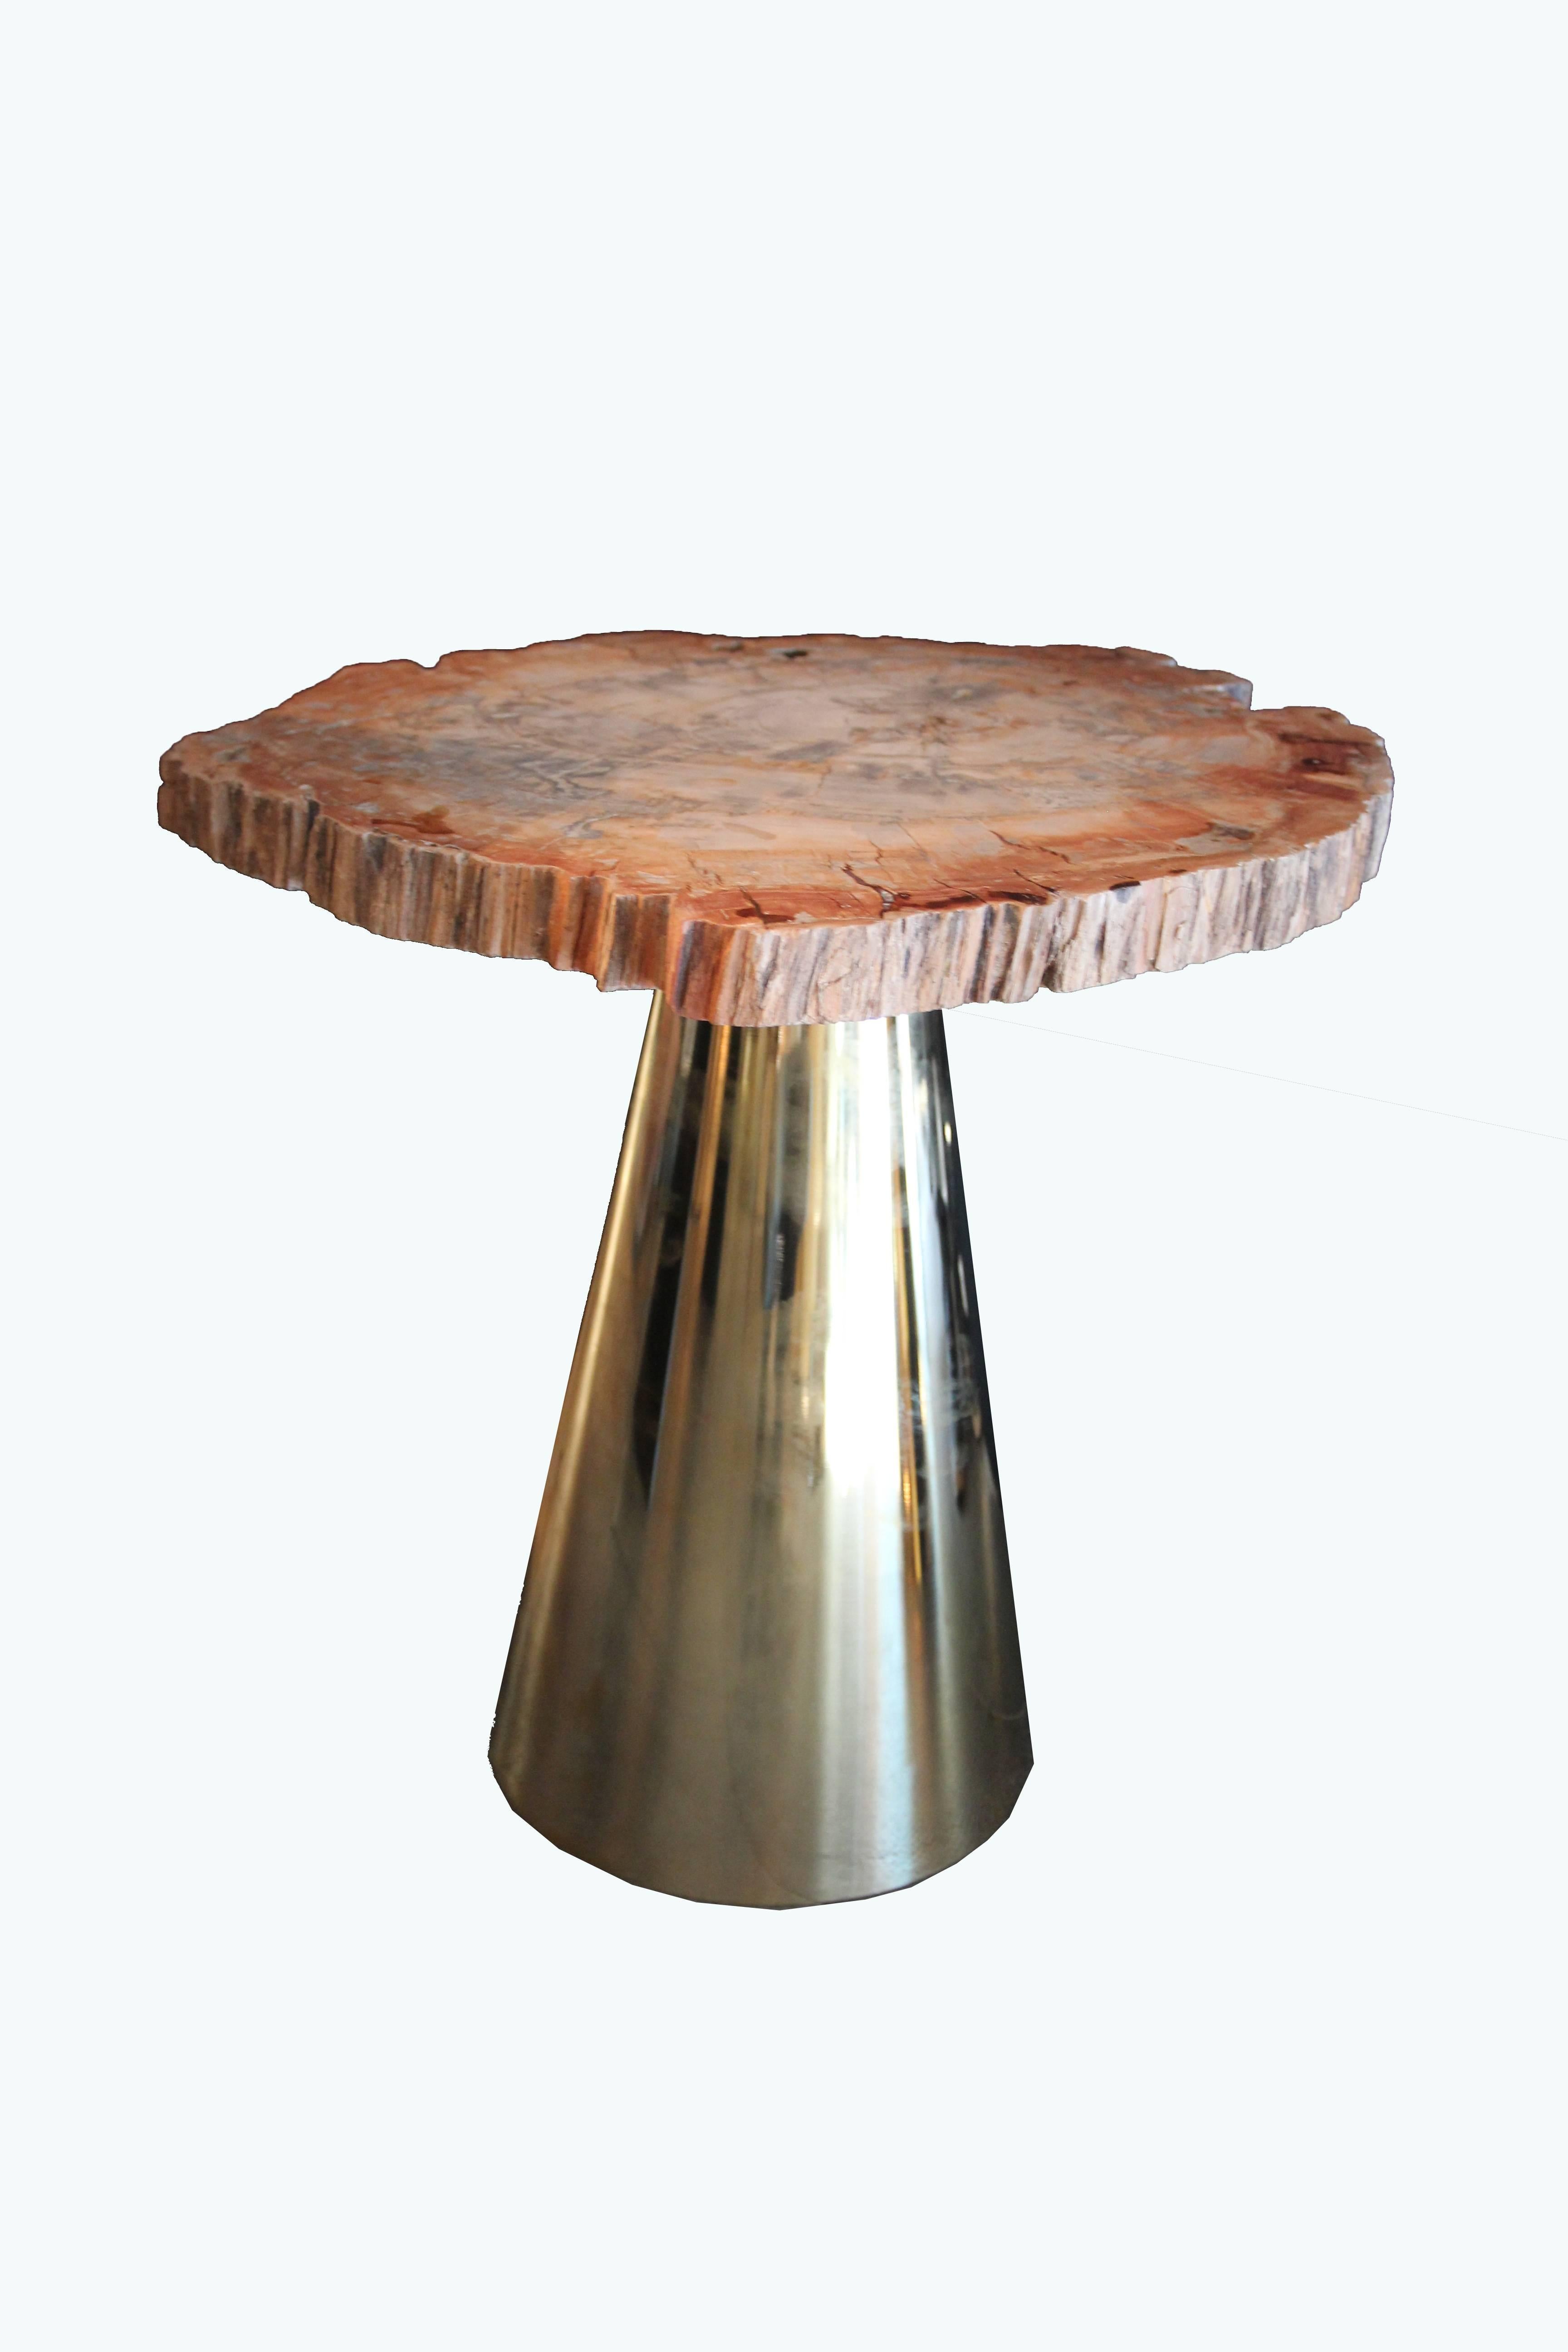 Pair of coffee tables.
Gold brass and marble top (fossilized wood),
circa 2010, Italy.
The largest: Height: 55 cm diameter: 56 cm,
The smallest: Height: 50 cm diameter: 54 cm.